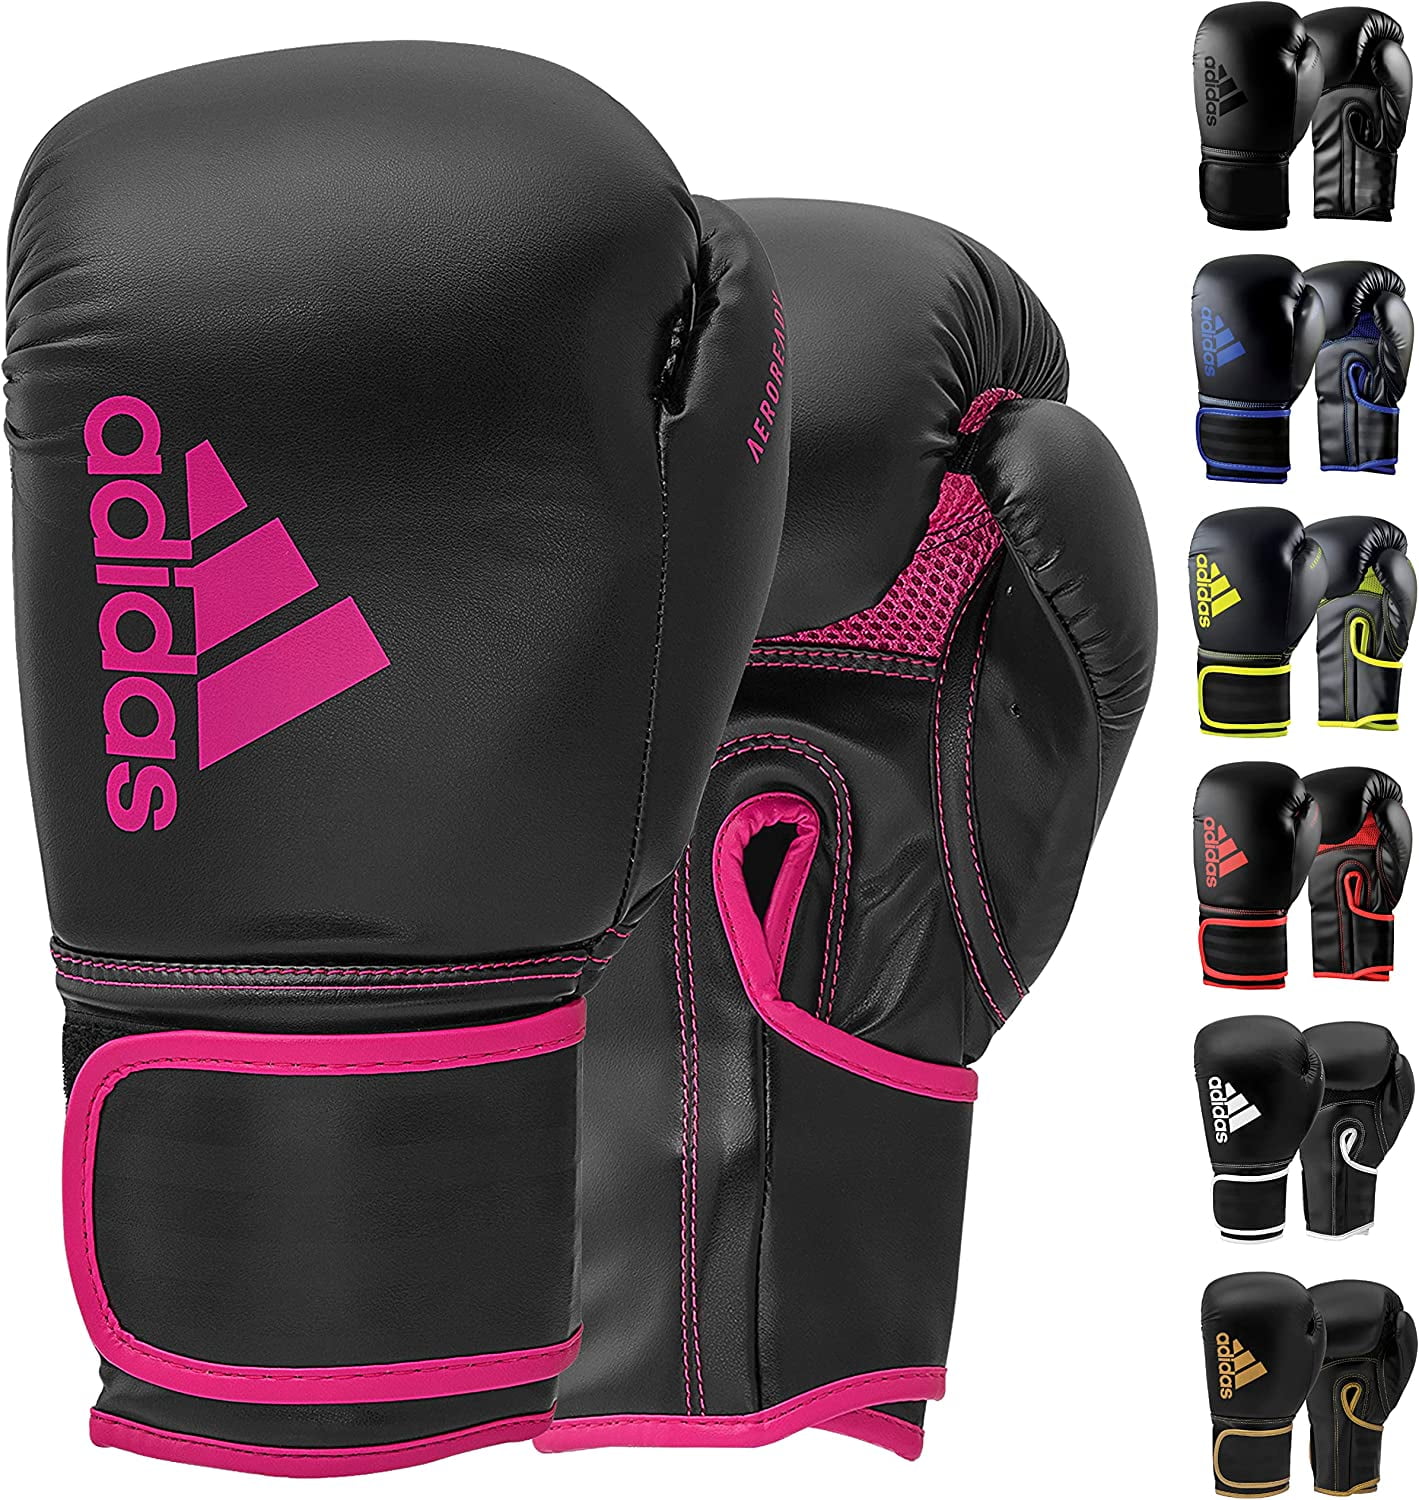 Boxing - Gloves Adidas Sparring - Training Kids pair for for set Gloves Blac/Pink, and Hybrid Gloves, 8oz 80 - Kickboxing Men, Women